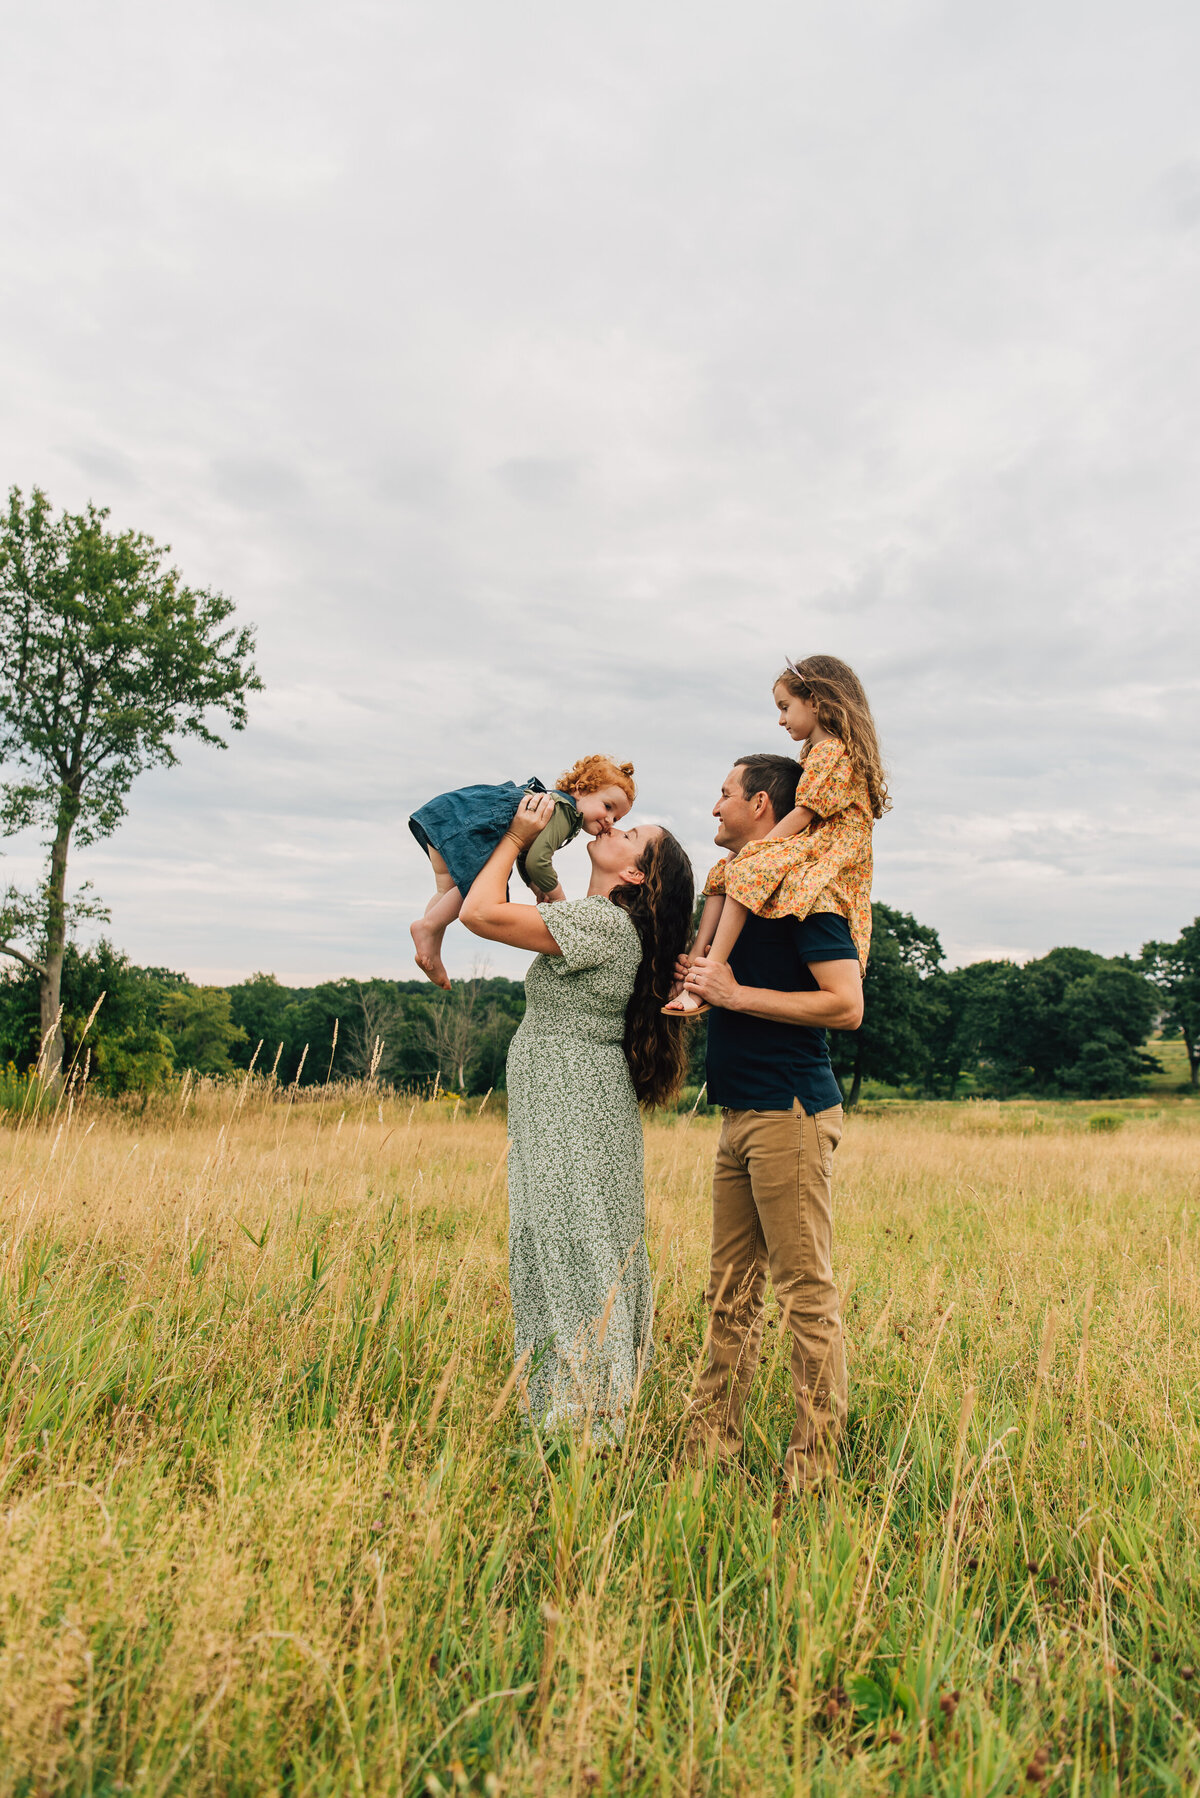 Family of four playing in field